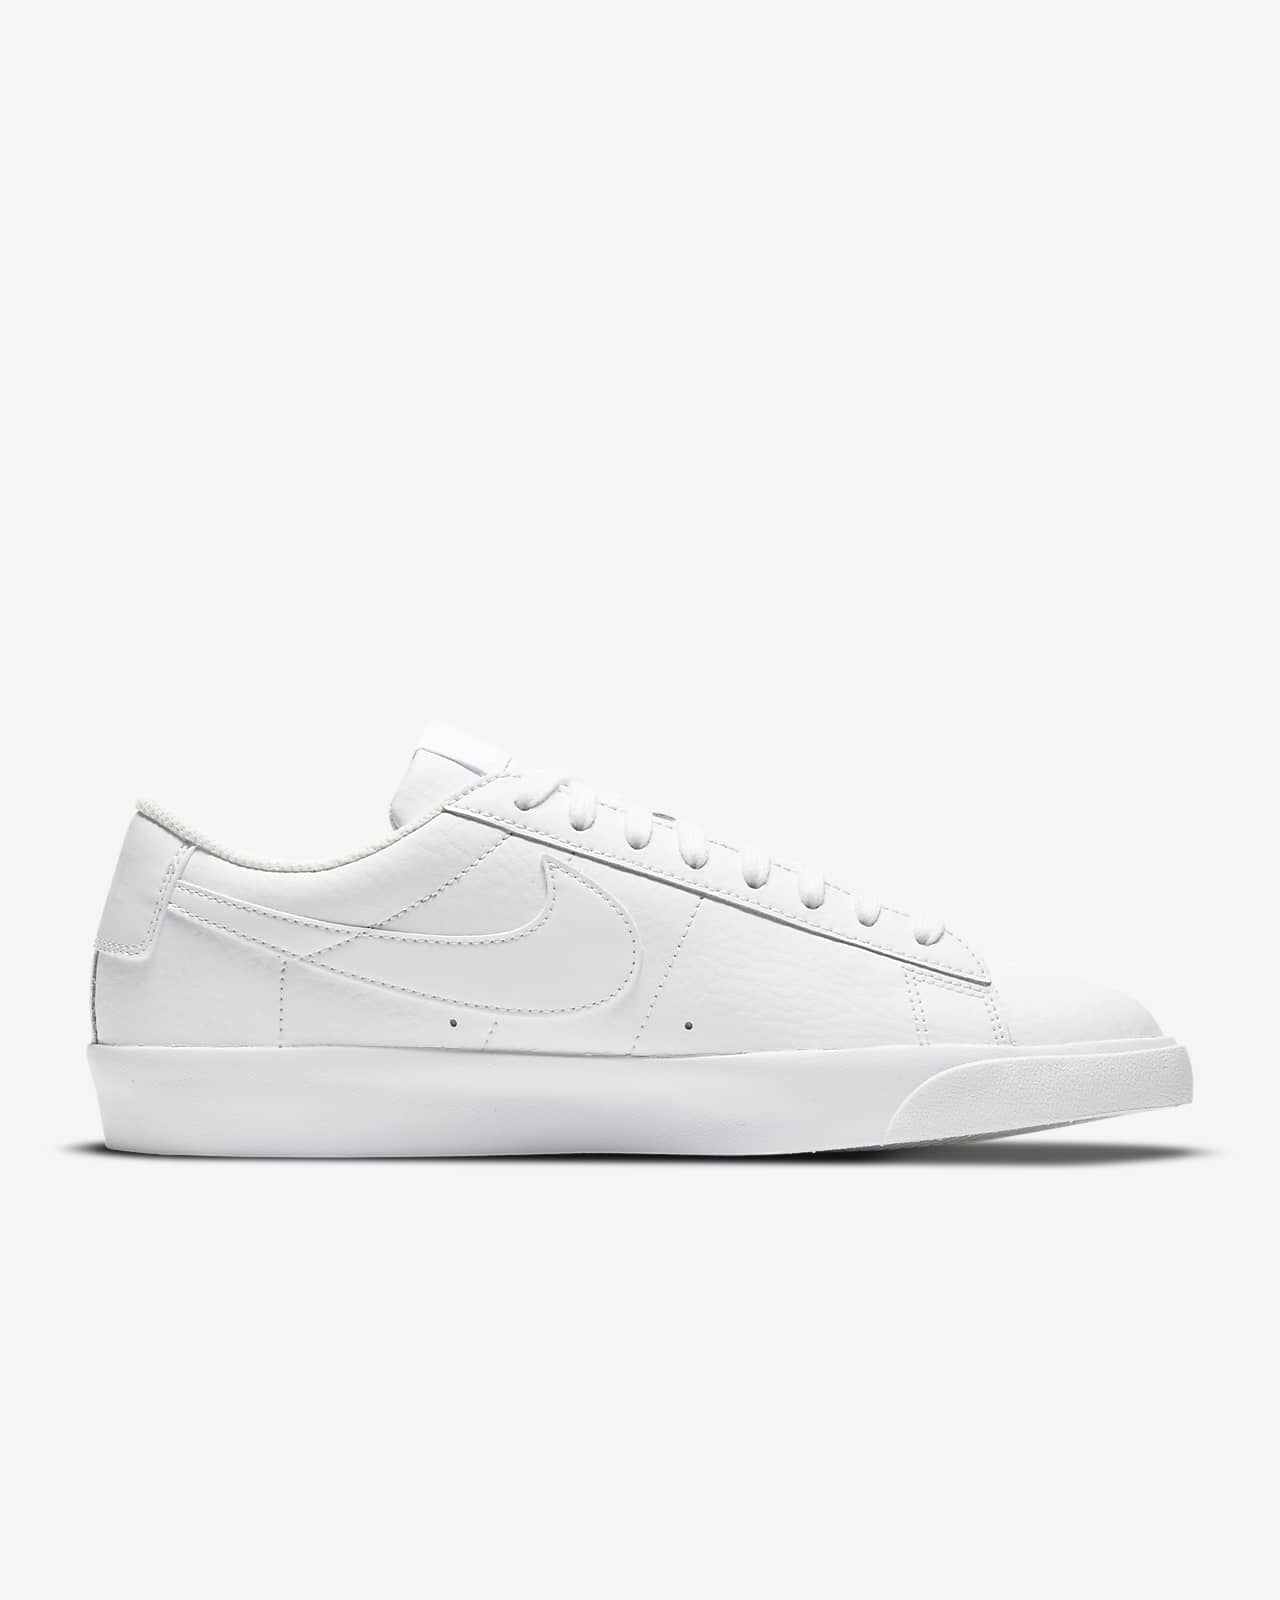 mens white leather nike shoes